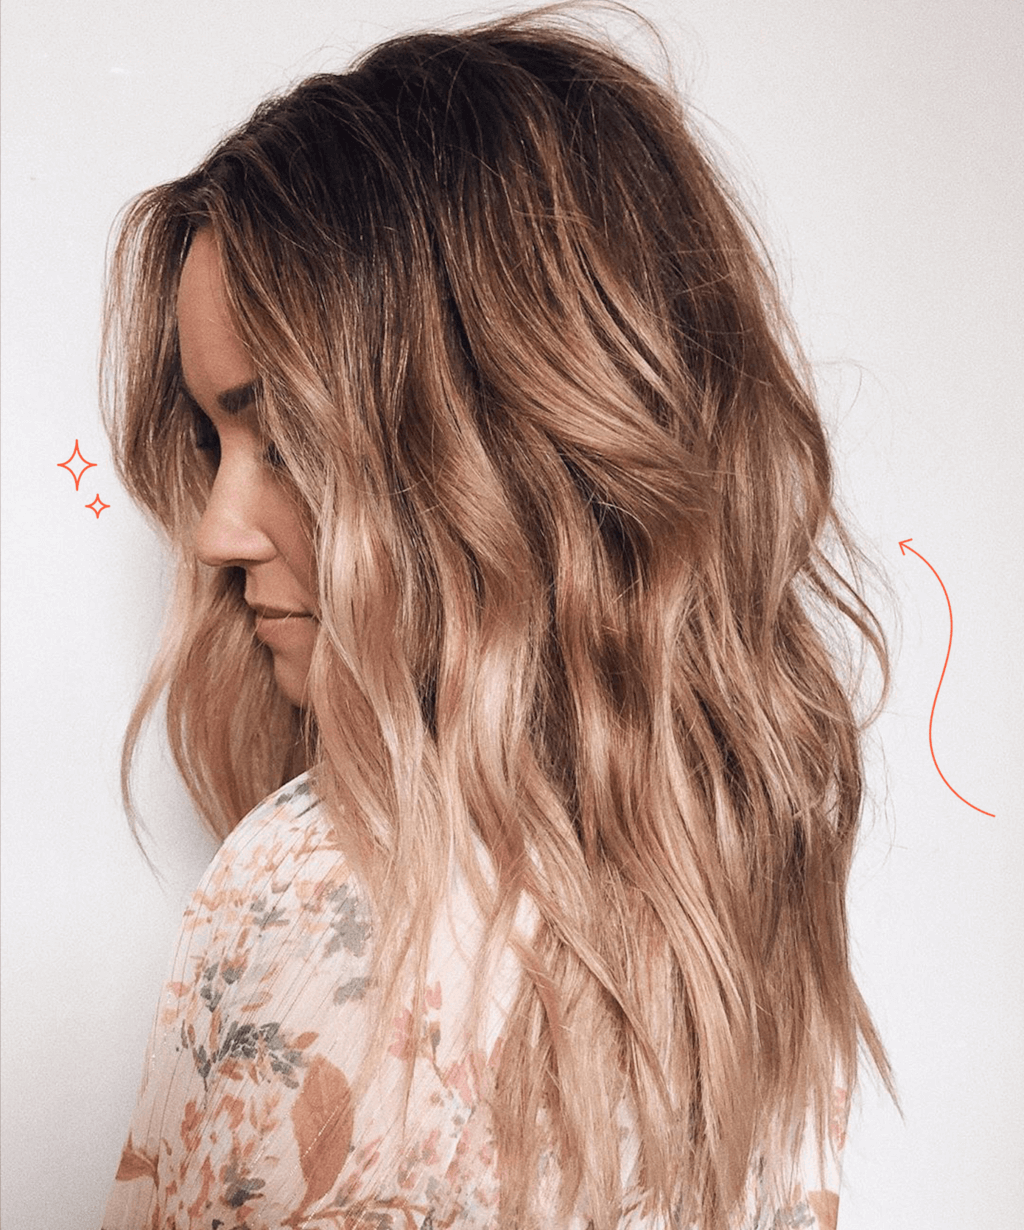 Fix Your Tangled Hair Extensions